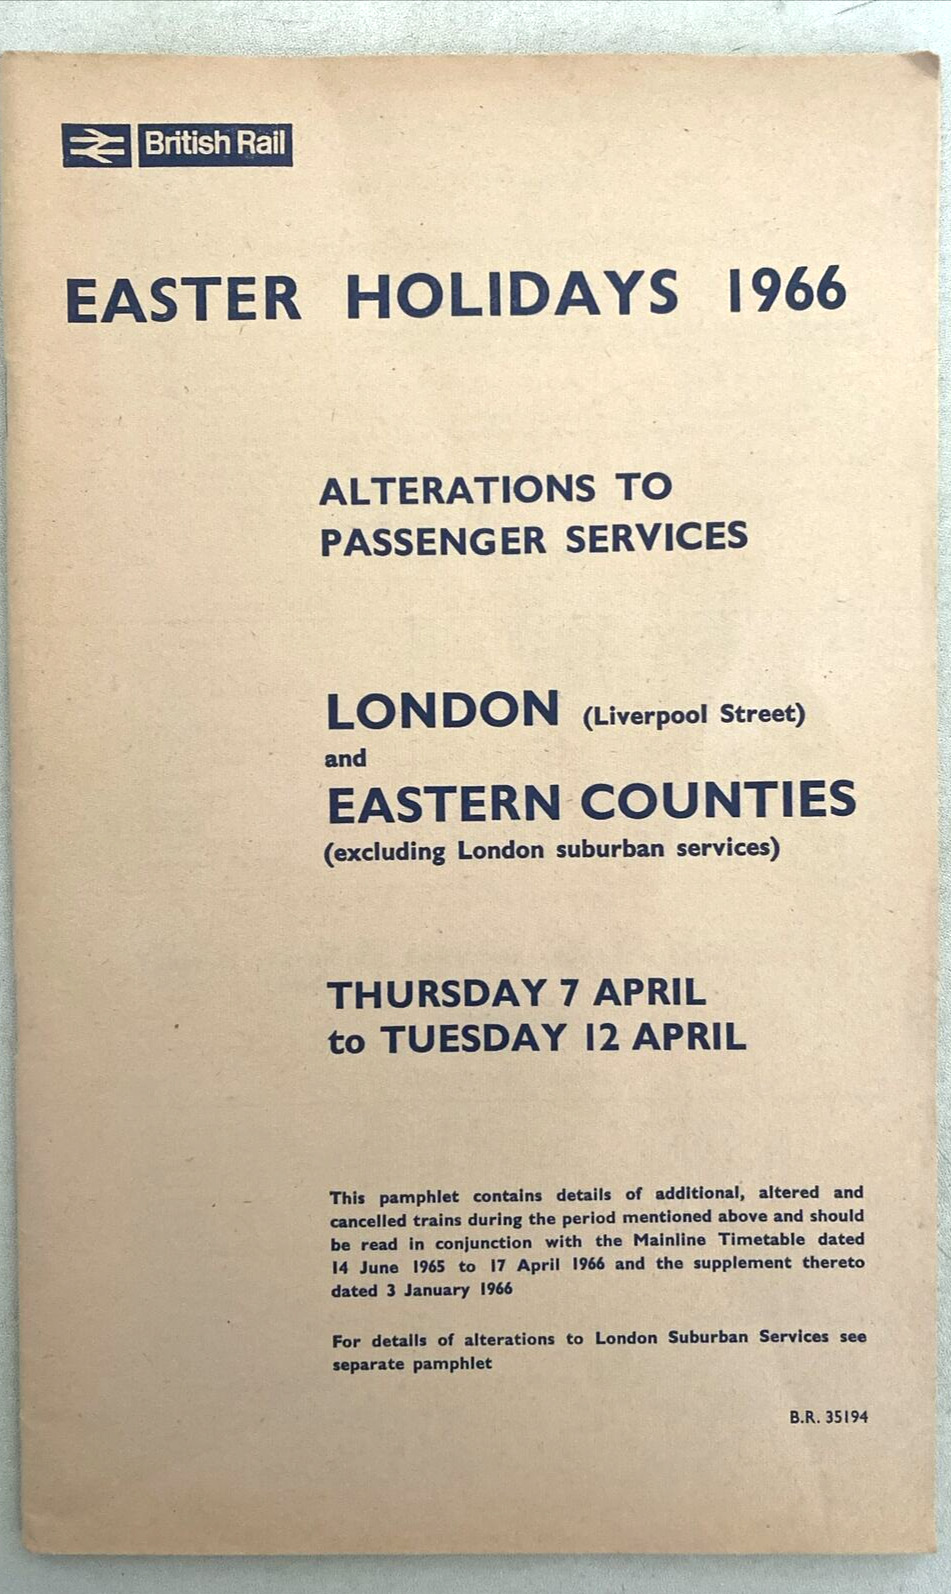 BRITISH RAIL ALTERATIONS PASSENGER SERVICES EASTER HOLIDAYS & MORE-APRIL 1966